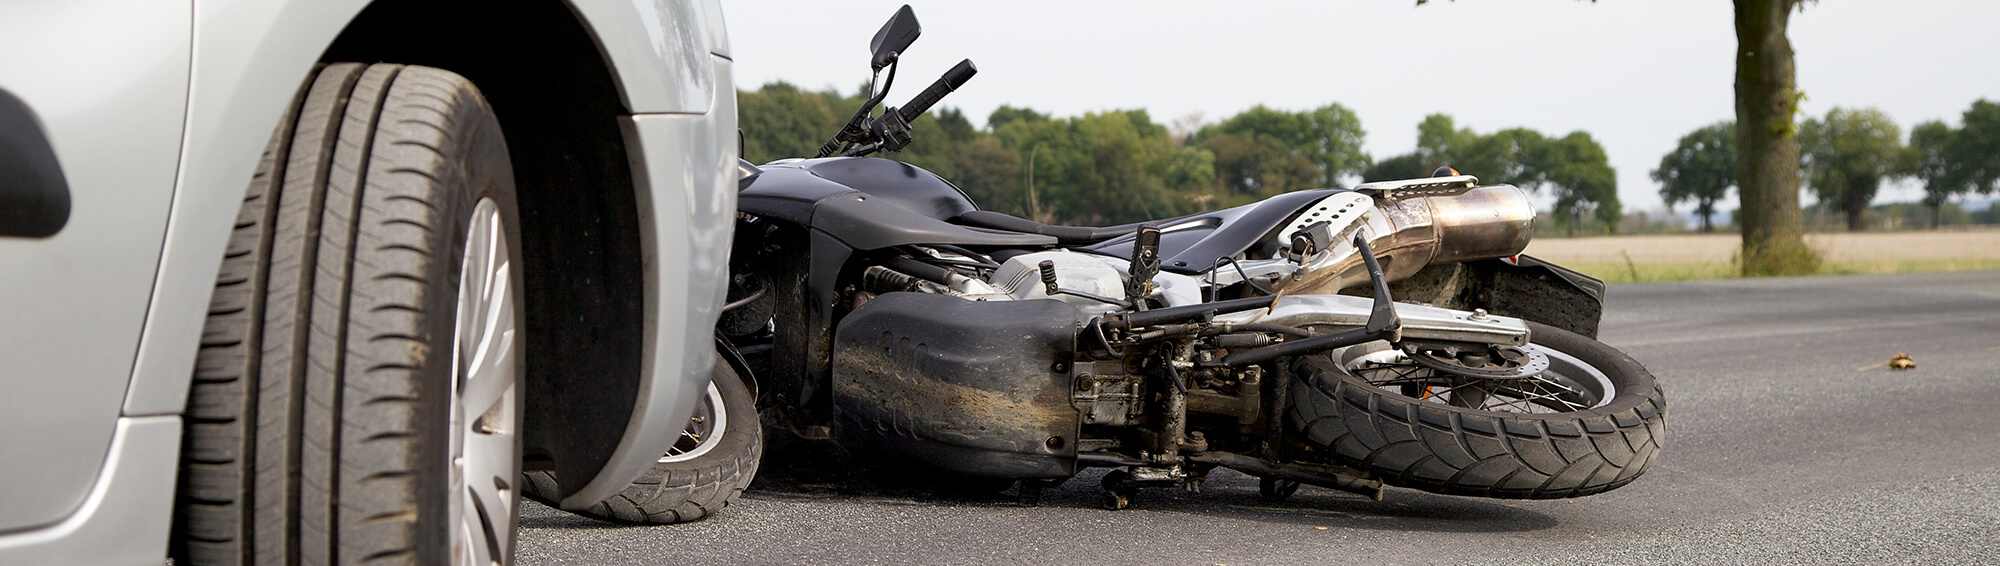 Motorcycle Accident Injuries Are Serious. We Want to Help You Get Compensation.